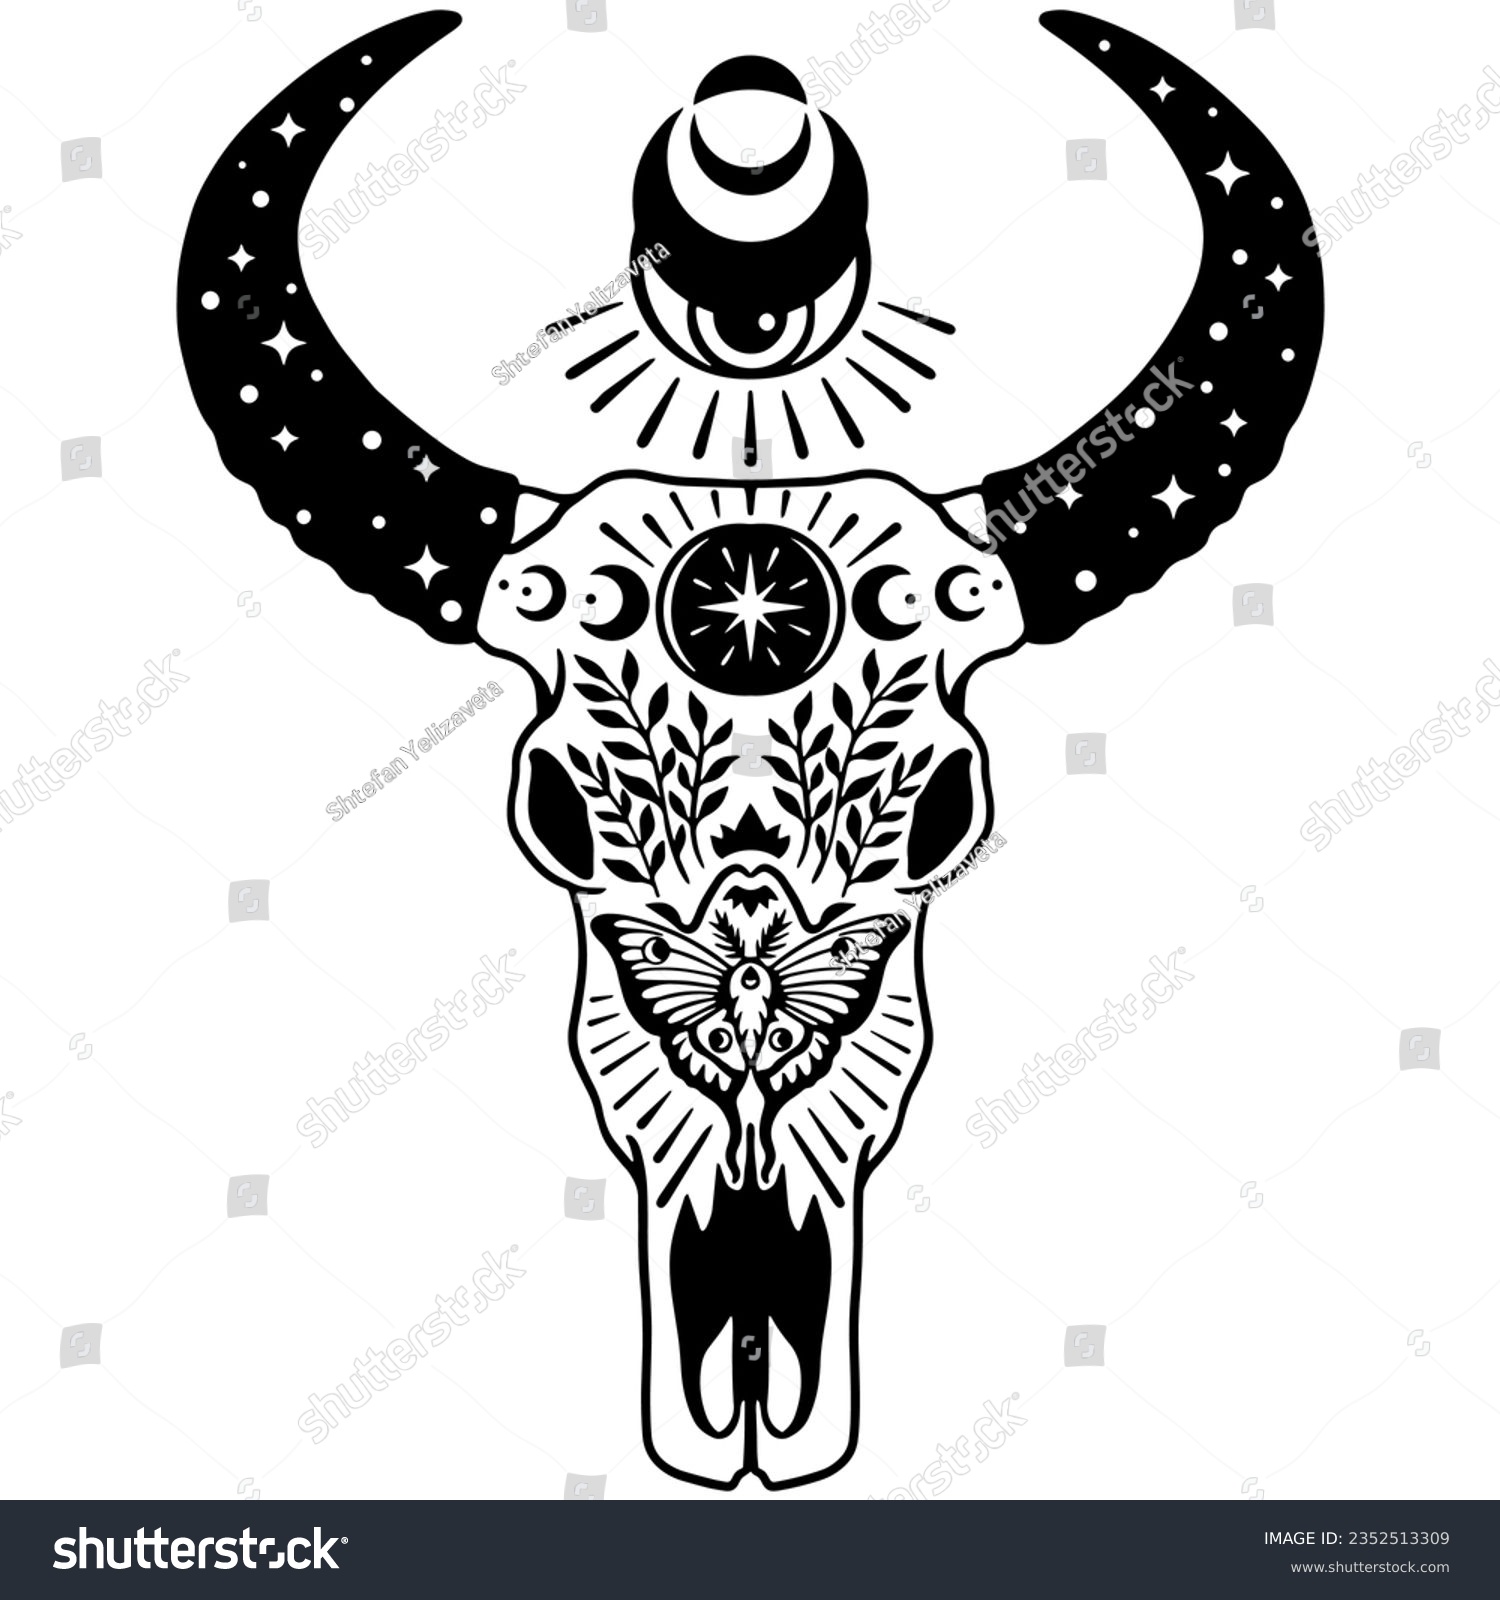 SVG of Texas Longhorn, Country Western boho magic Bull Cattle Vintage Label Logo Design. Vector hand drawing of the head of a bull skull on a white background. Hand drawing svg